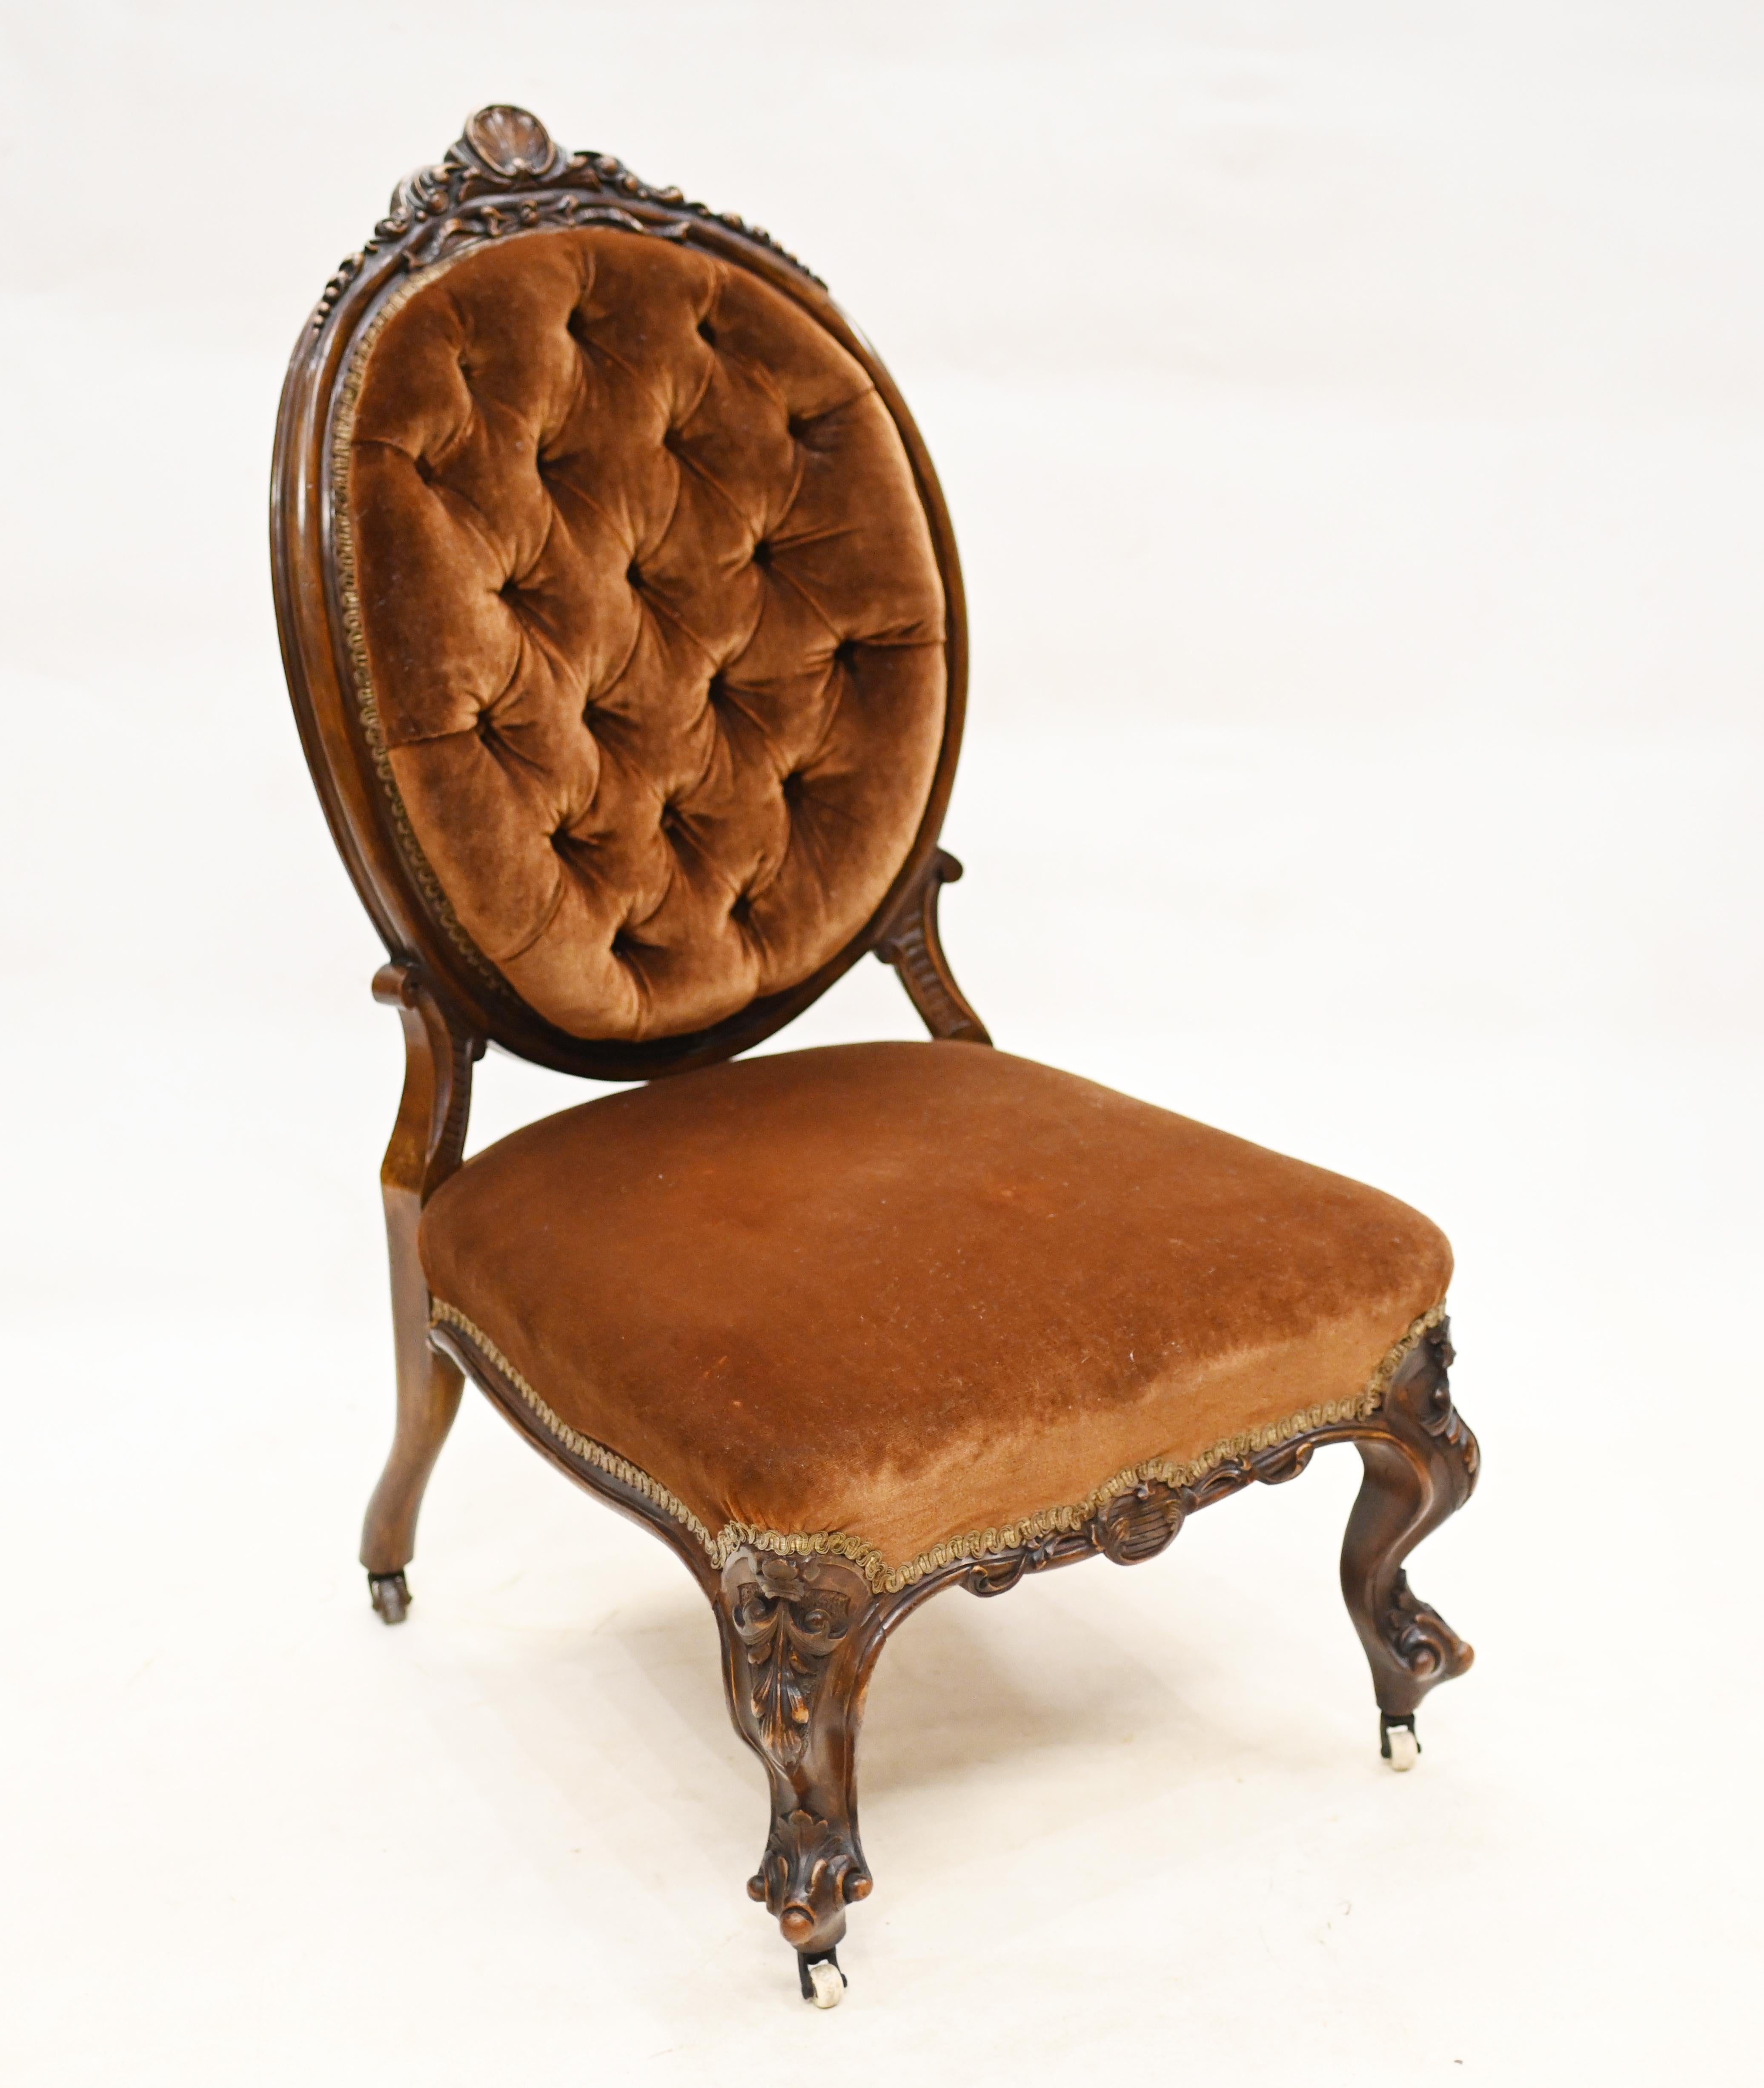 Elegant Victorian nursing chair in mahogany
Can also function as a parlour or salon chair
Circa 1860 on this collectable piece
The low seat is a give away to it being originally designed as a nursing chair
Offered in great shape and will ship to